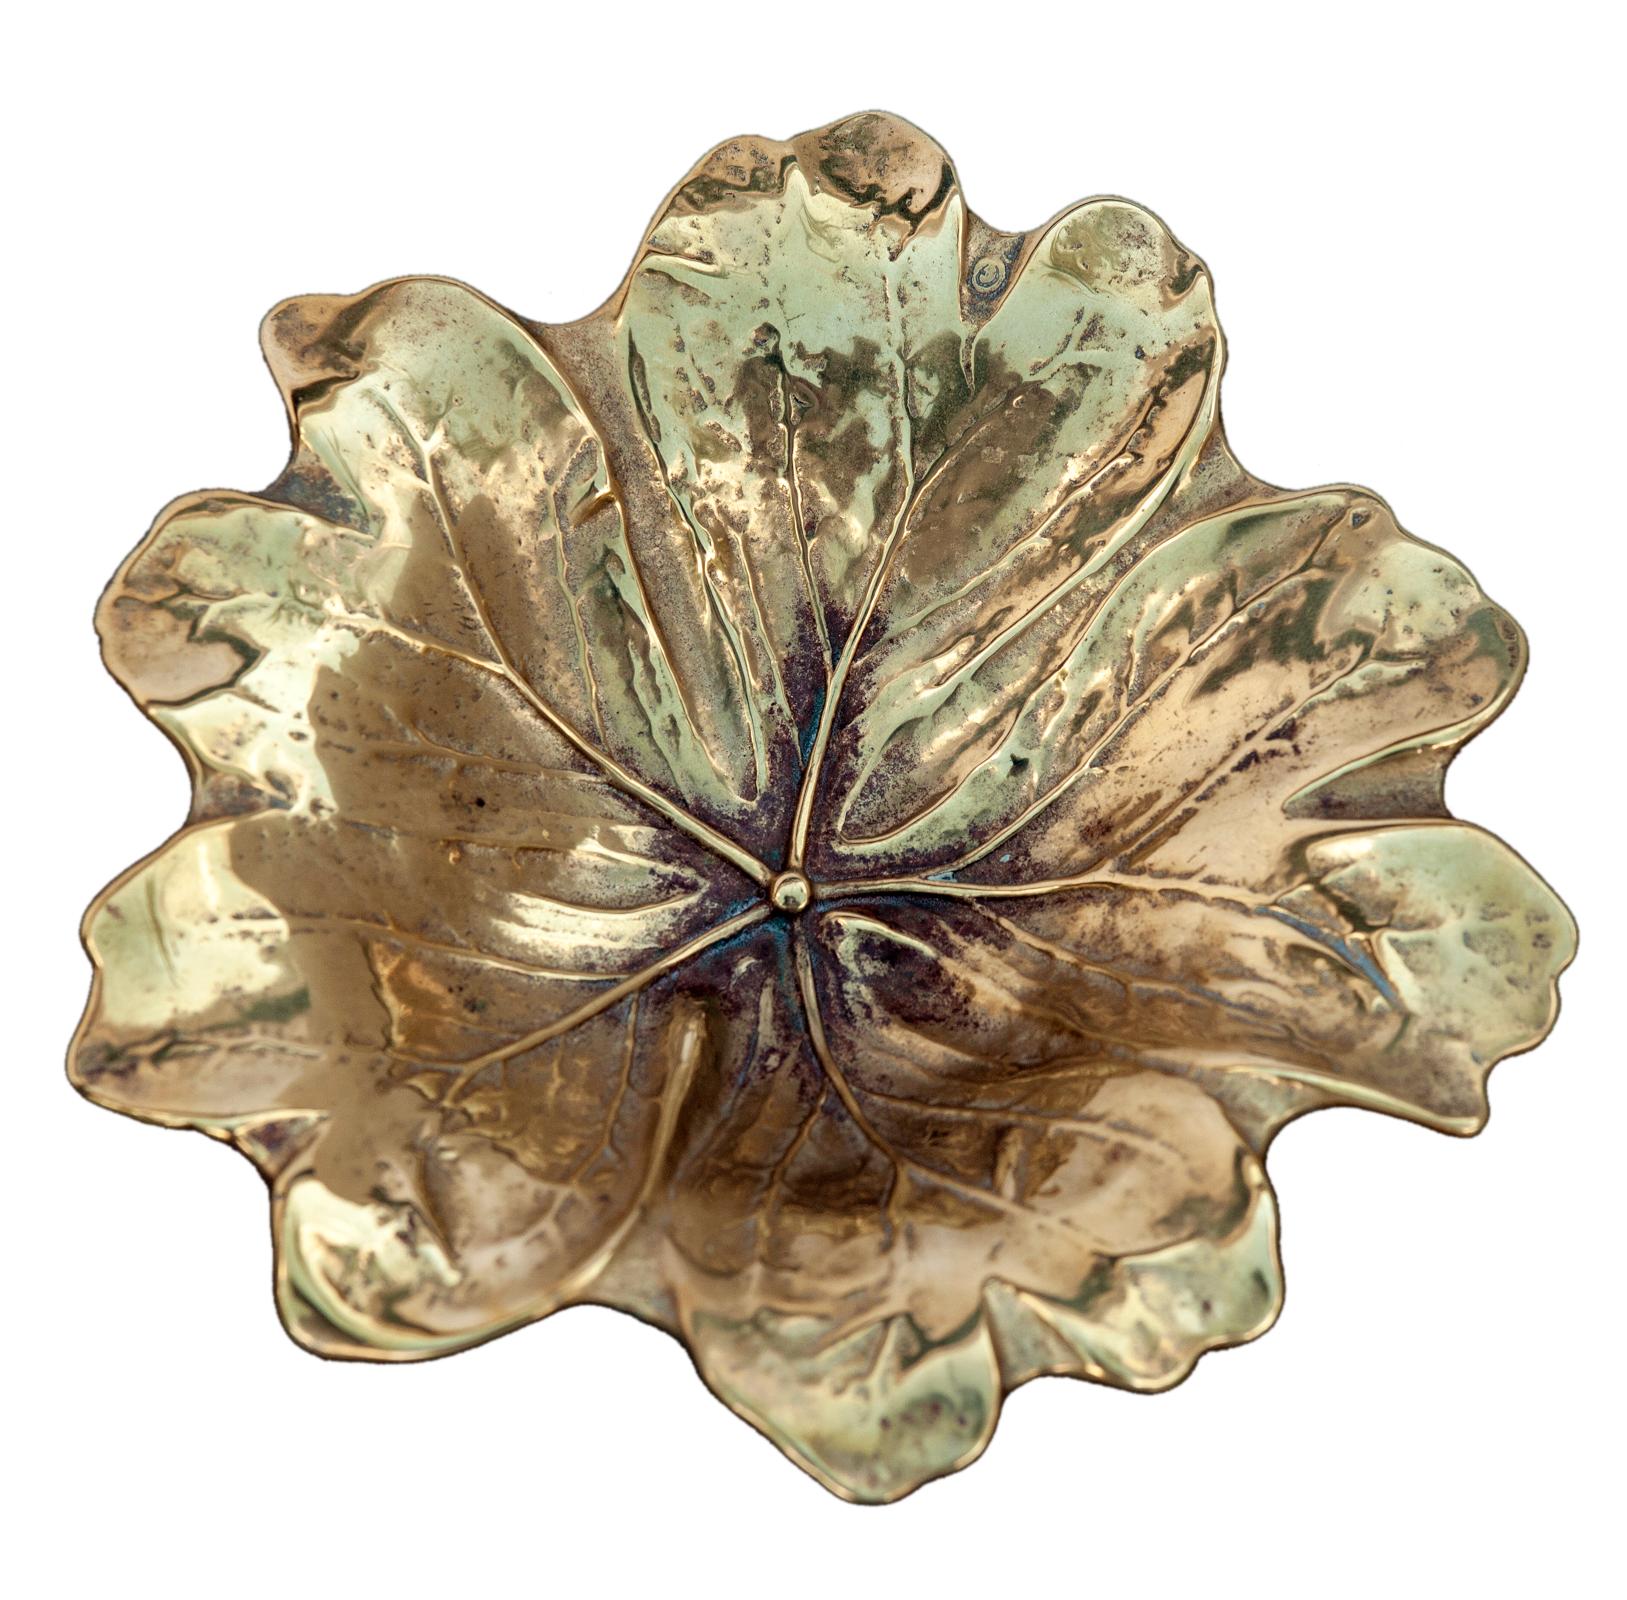 Gold toned brass Mayapple leaf tray.
The Mayapple is unique in that it has just 2 leaves & 1 flower. The large umbrella like leaves are very dramatic & unusual, for this reason Virginia Metalcrafter's showcased the leaf in the 1940's.
A very heavy